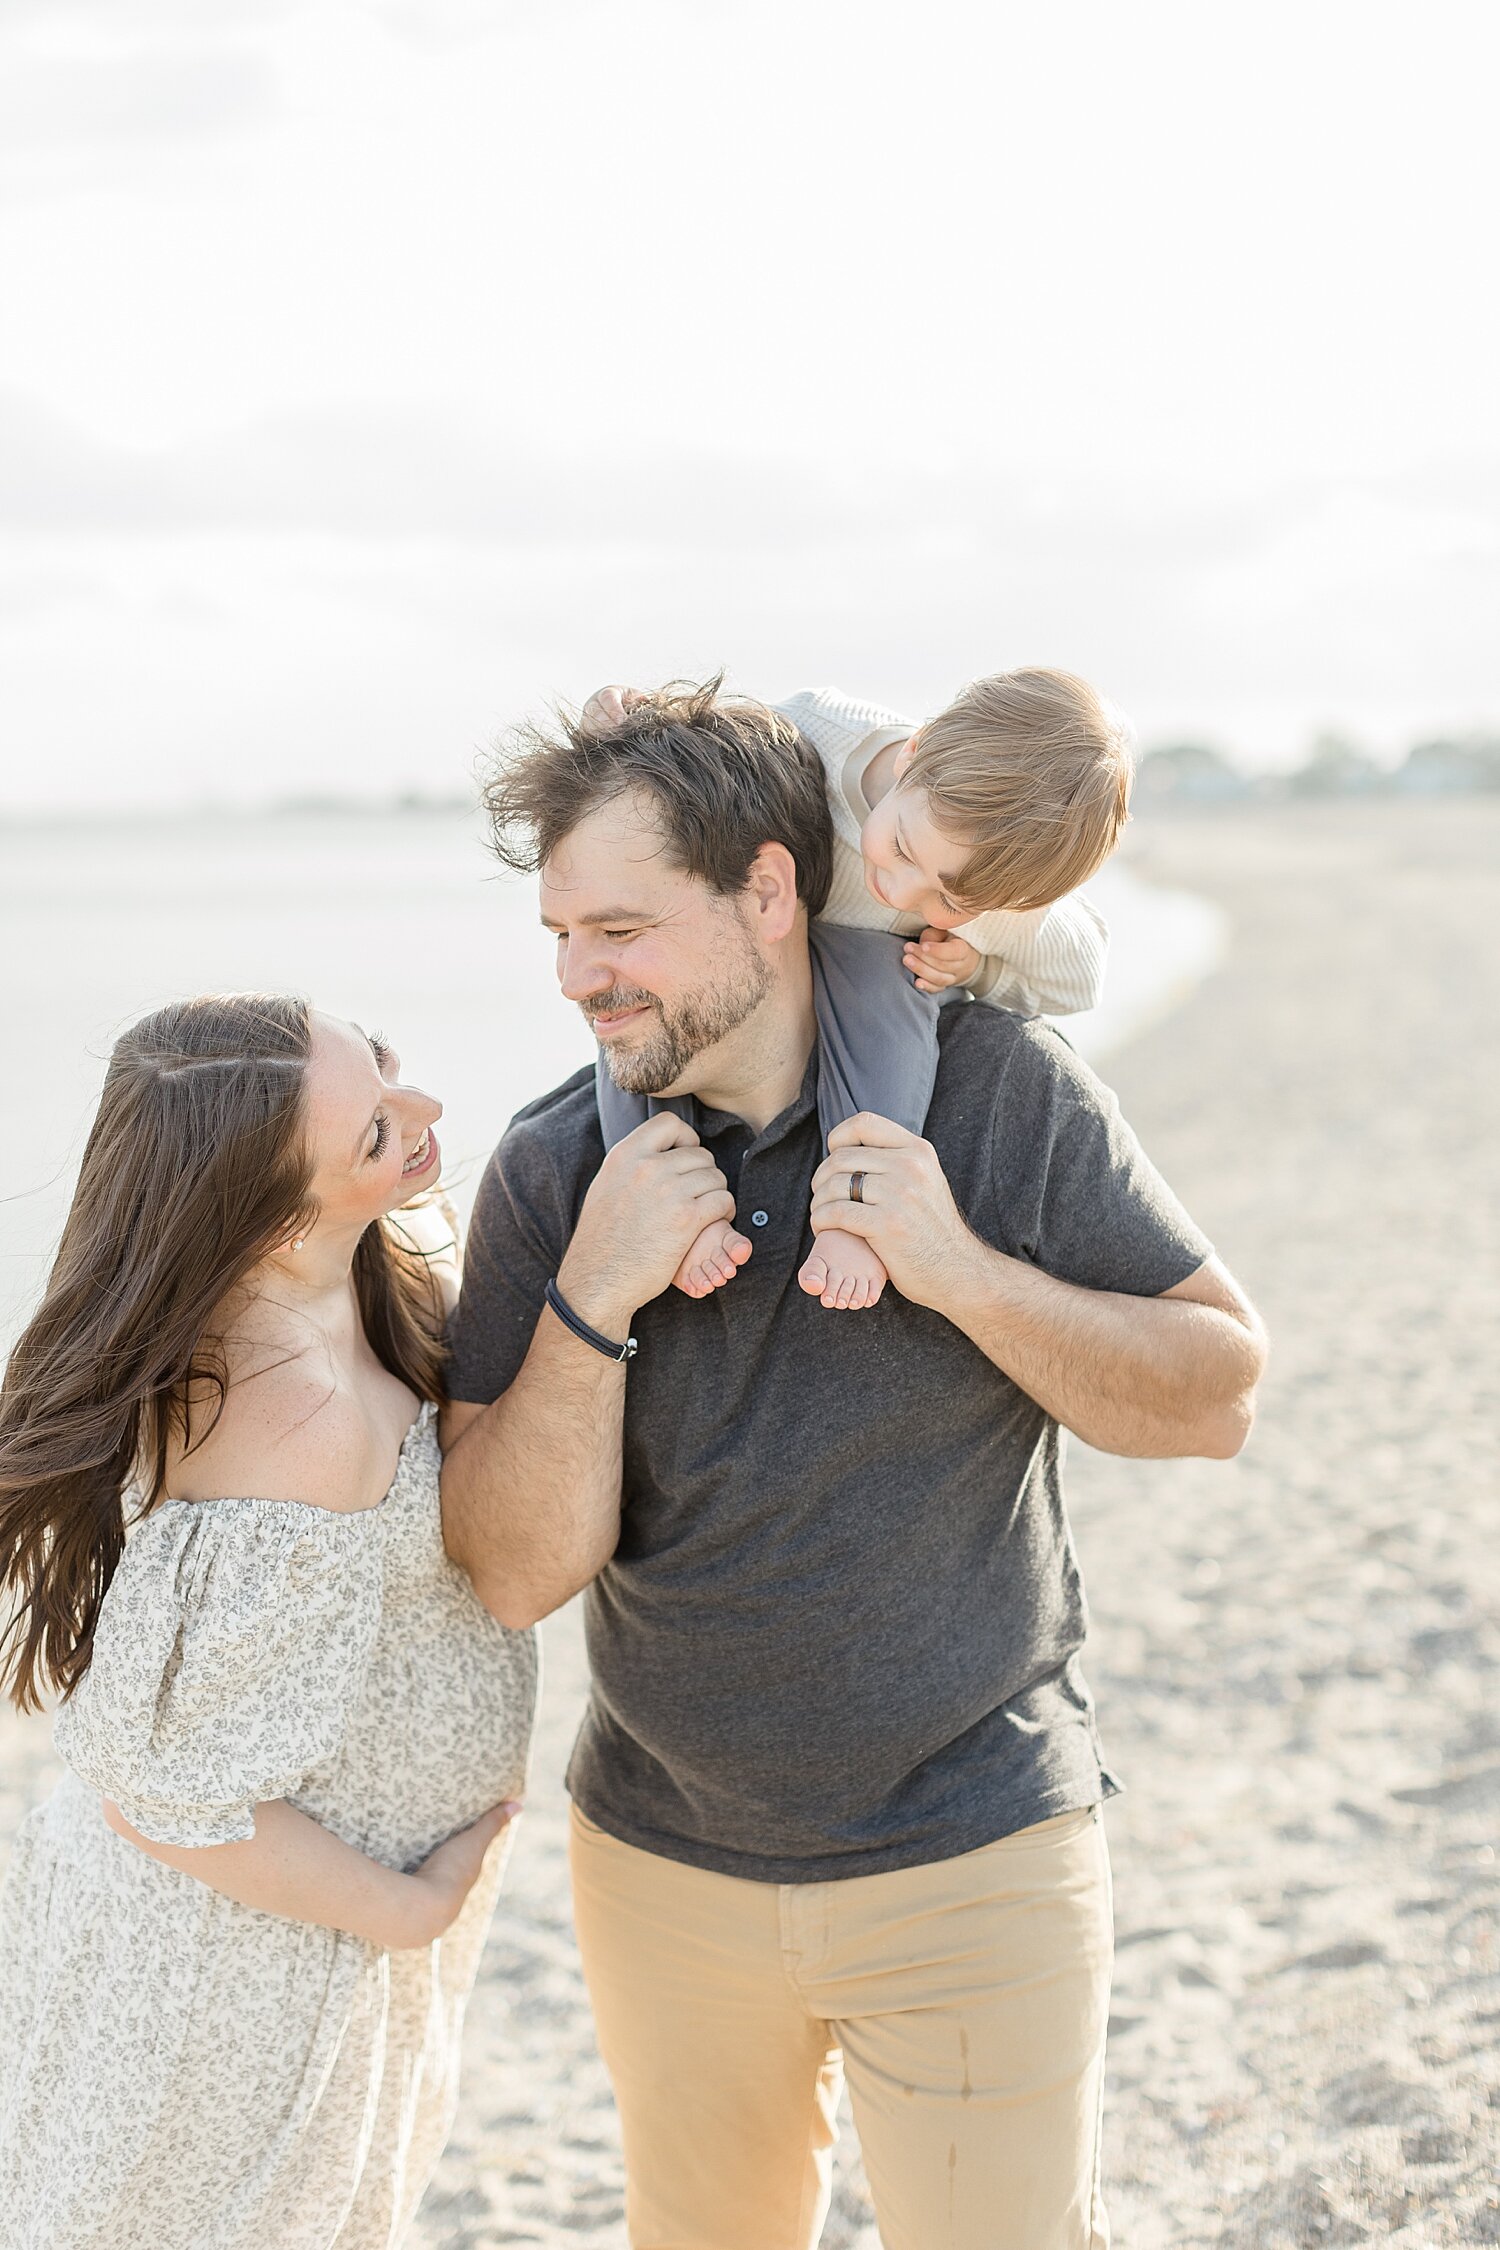 Beach maternity session at Sherwood Island in Westport, CT with Kristin Wood Photography.